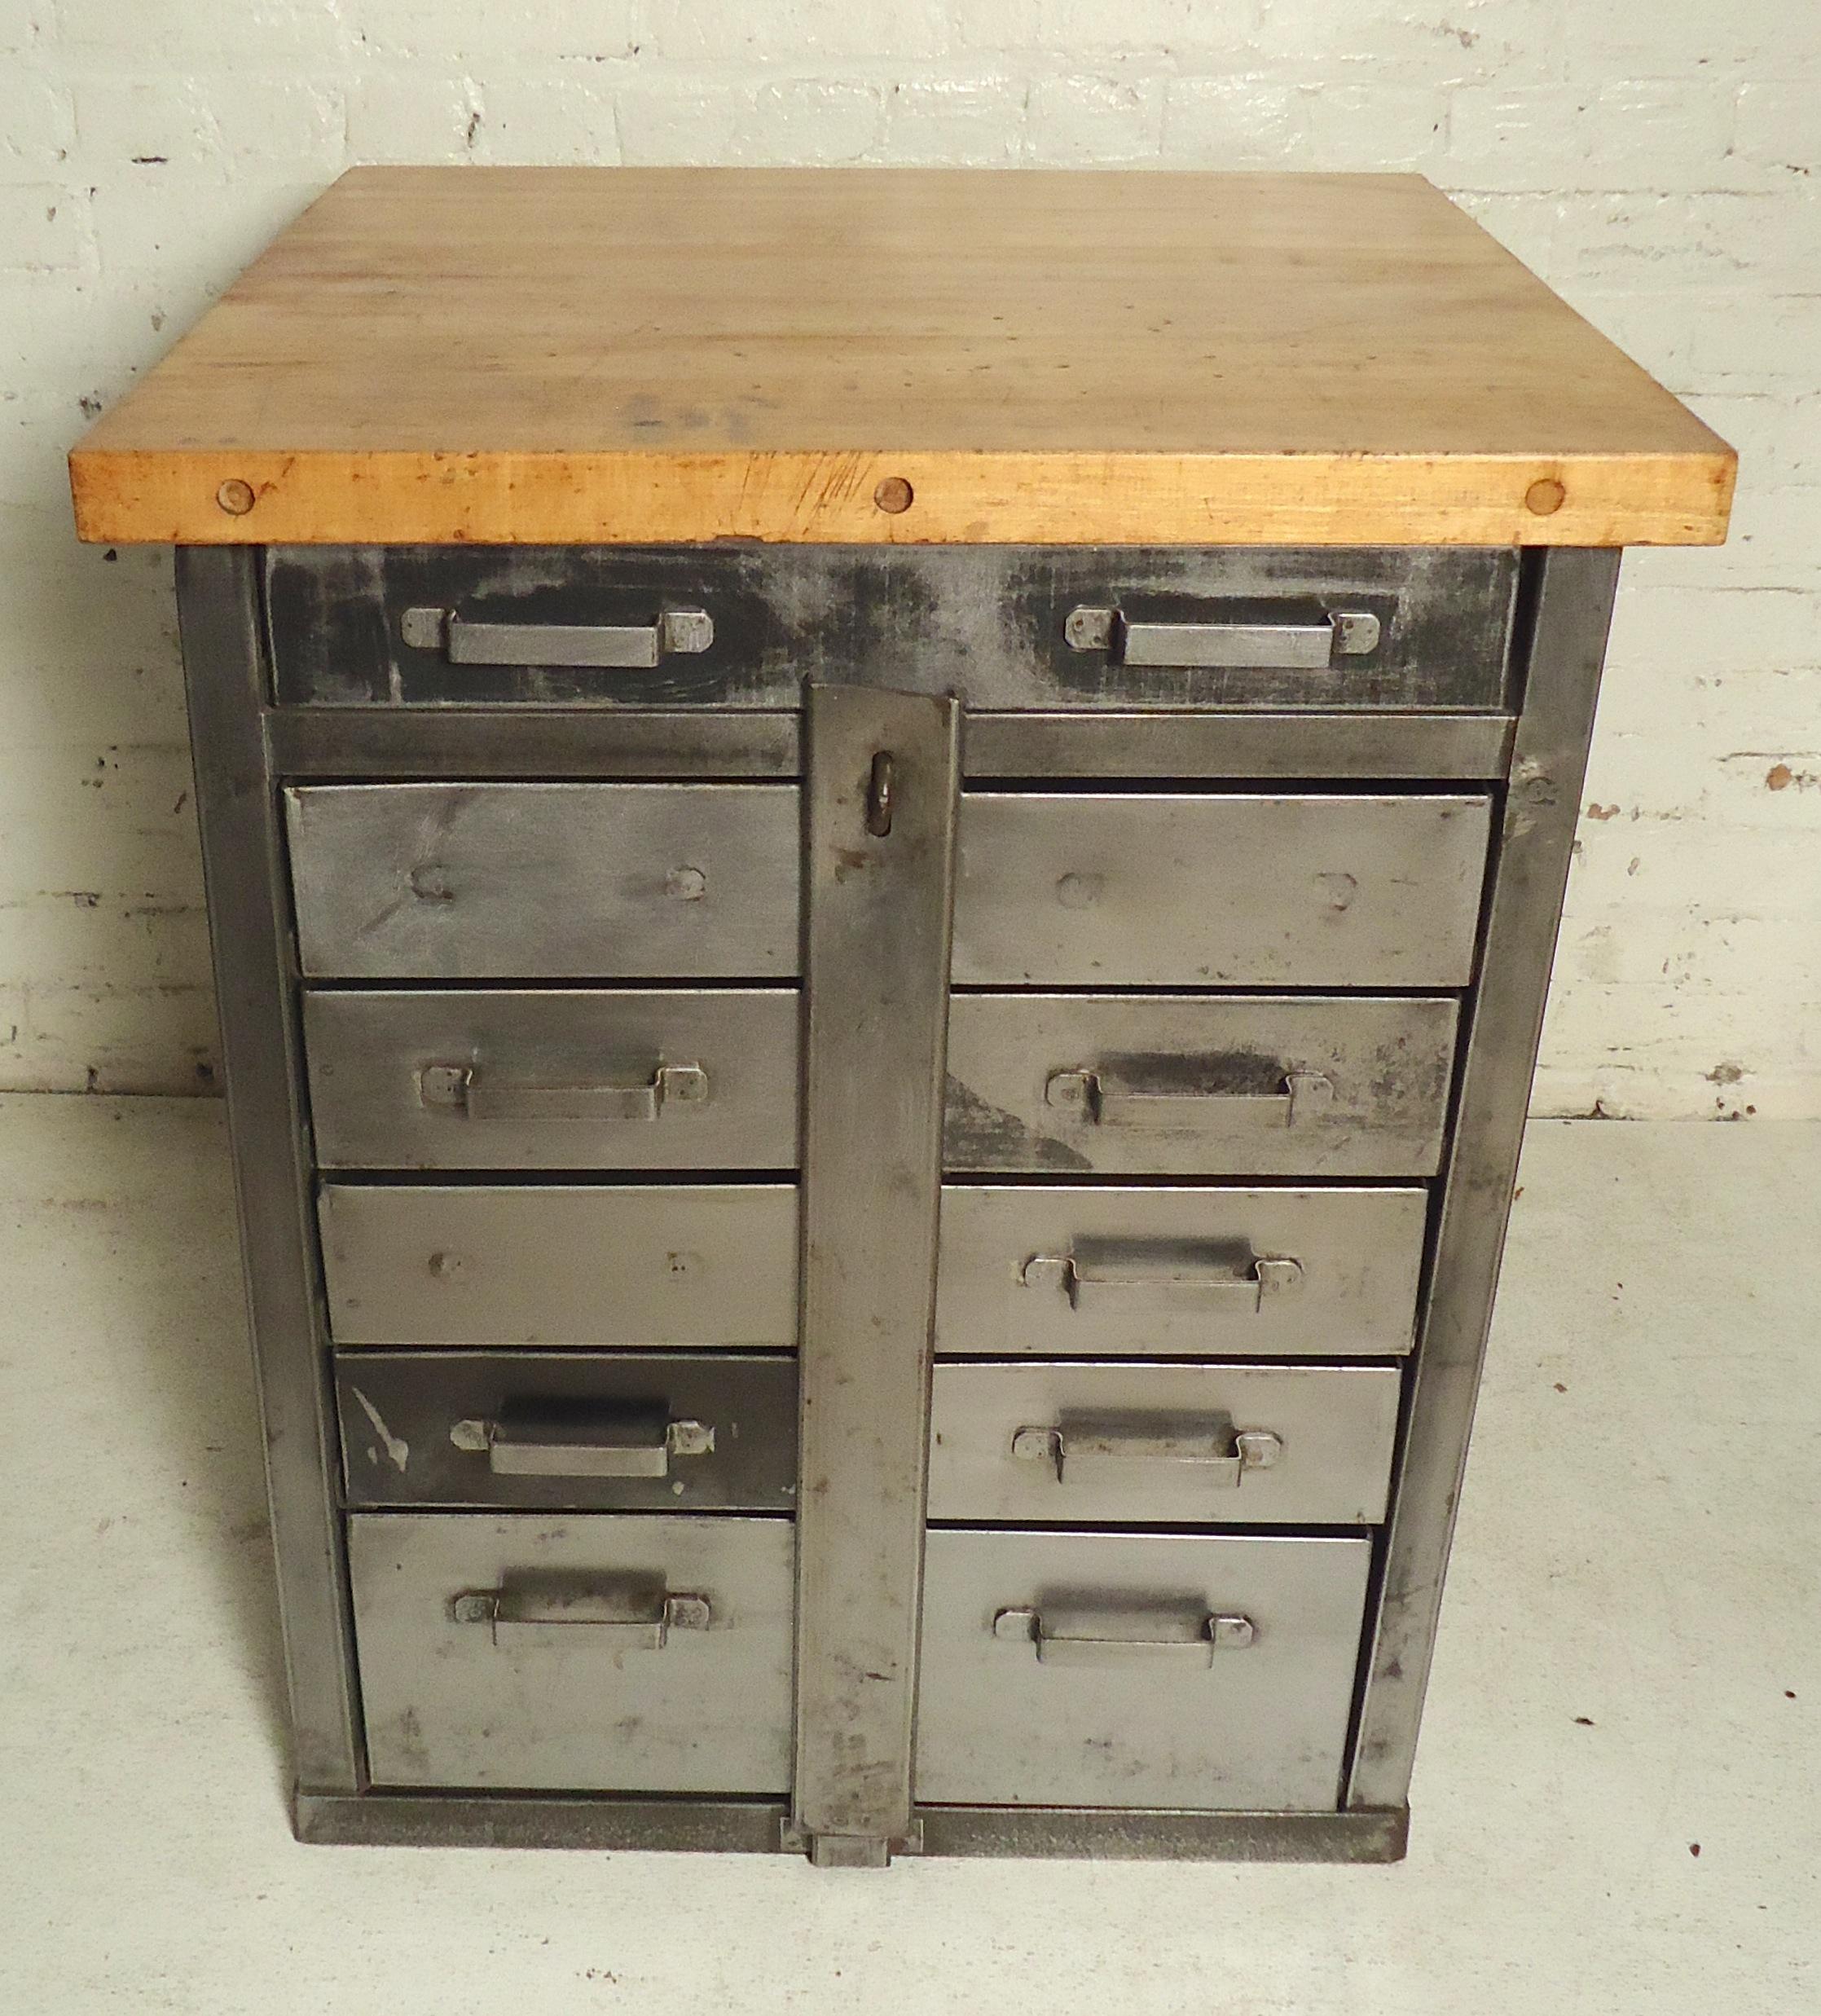 Metal cabinet refinished in an Industrial style. Thick butcher block top, eleven drawers. Great as a modern kitchen island.

(Please confirm item location - NY or NJ - with dealer).
  